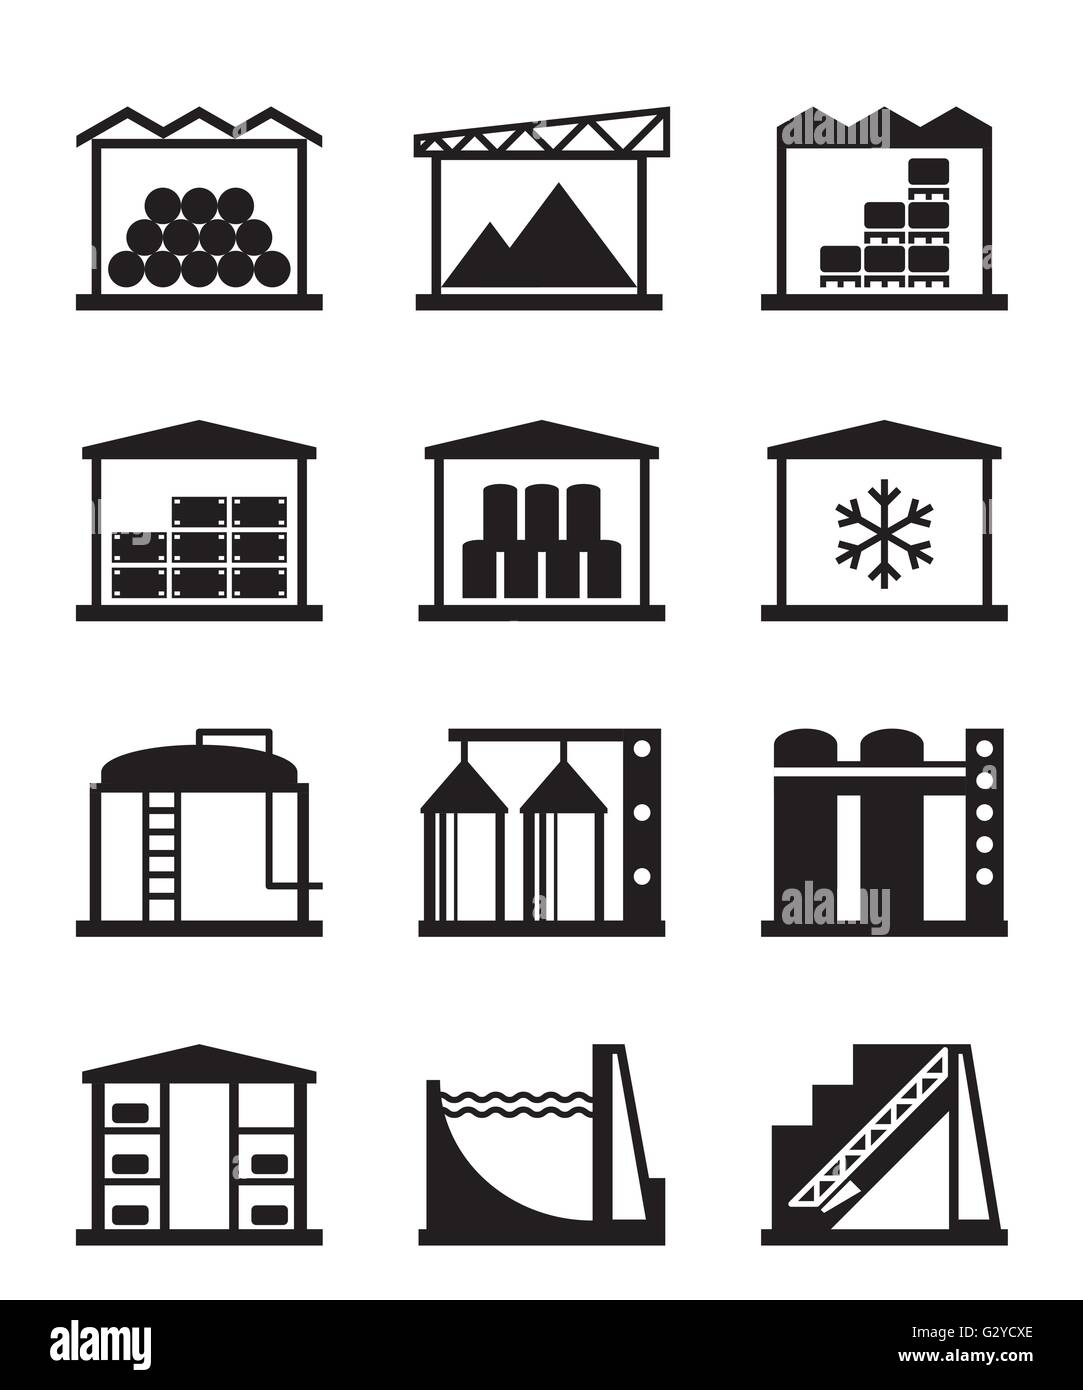 Industrial and commercial warehouses - vector illustration Stock Vector